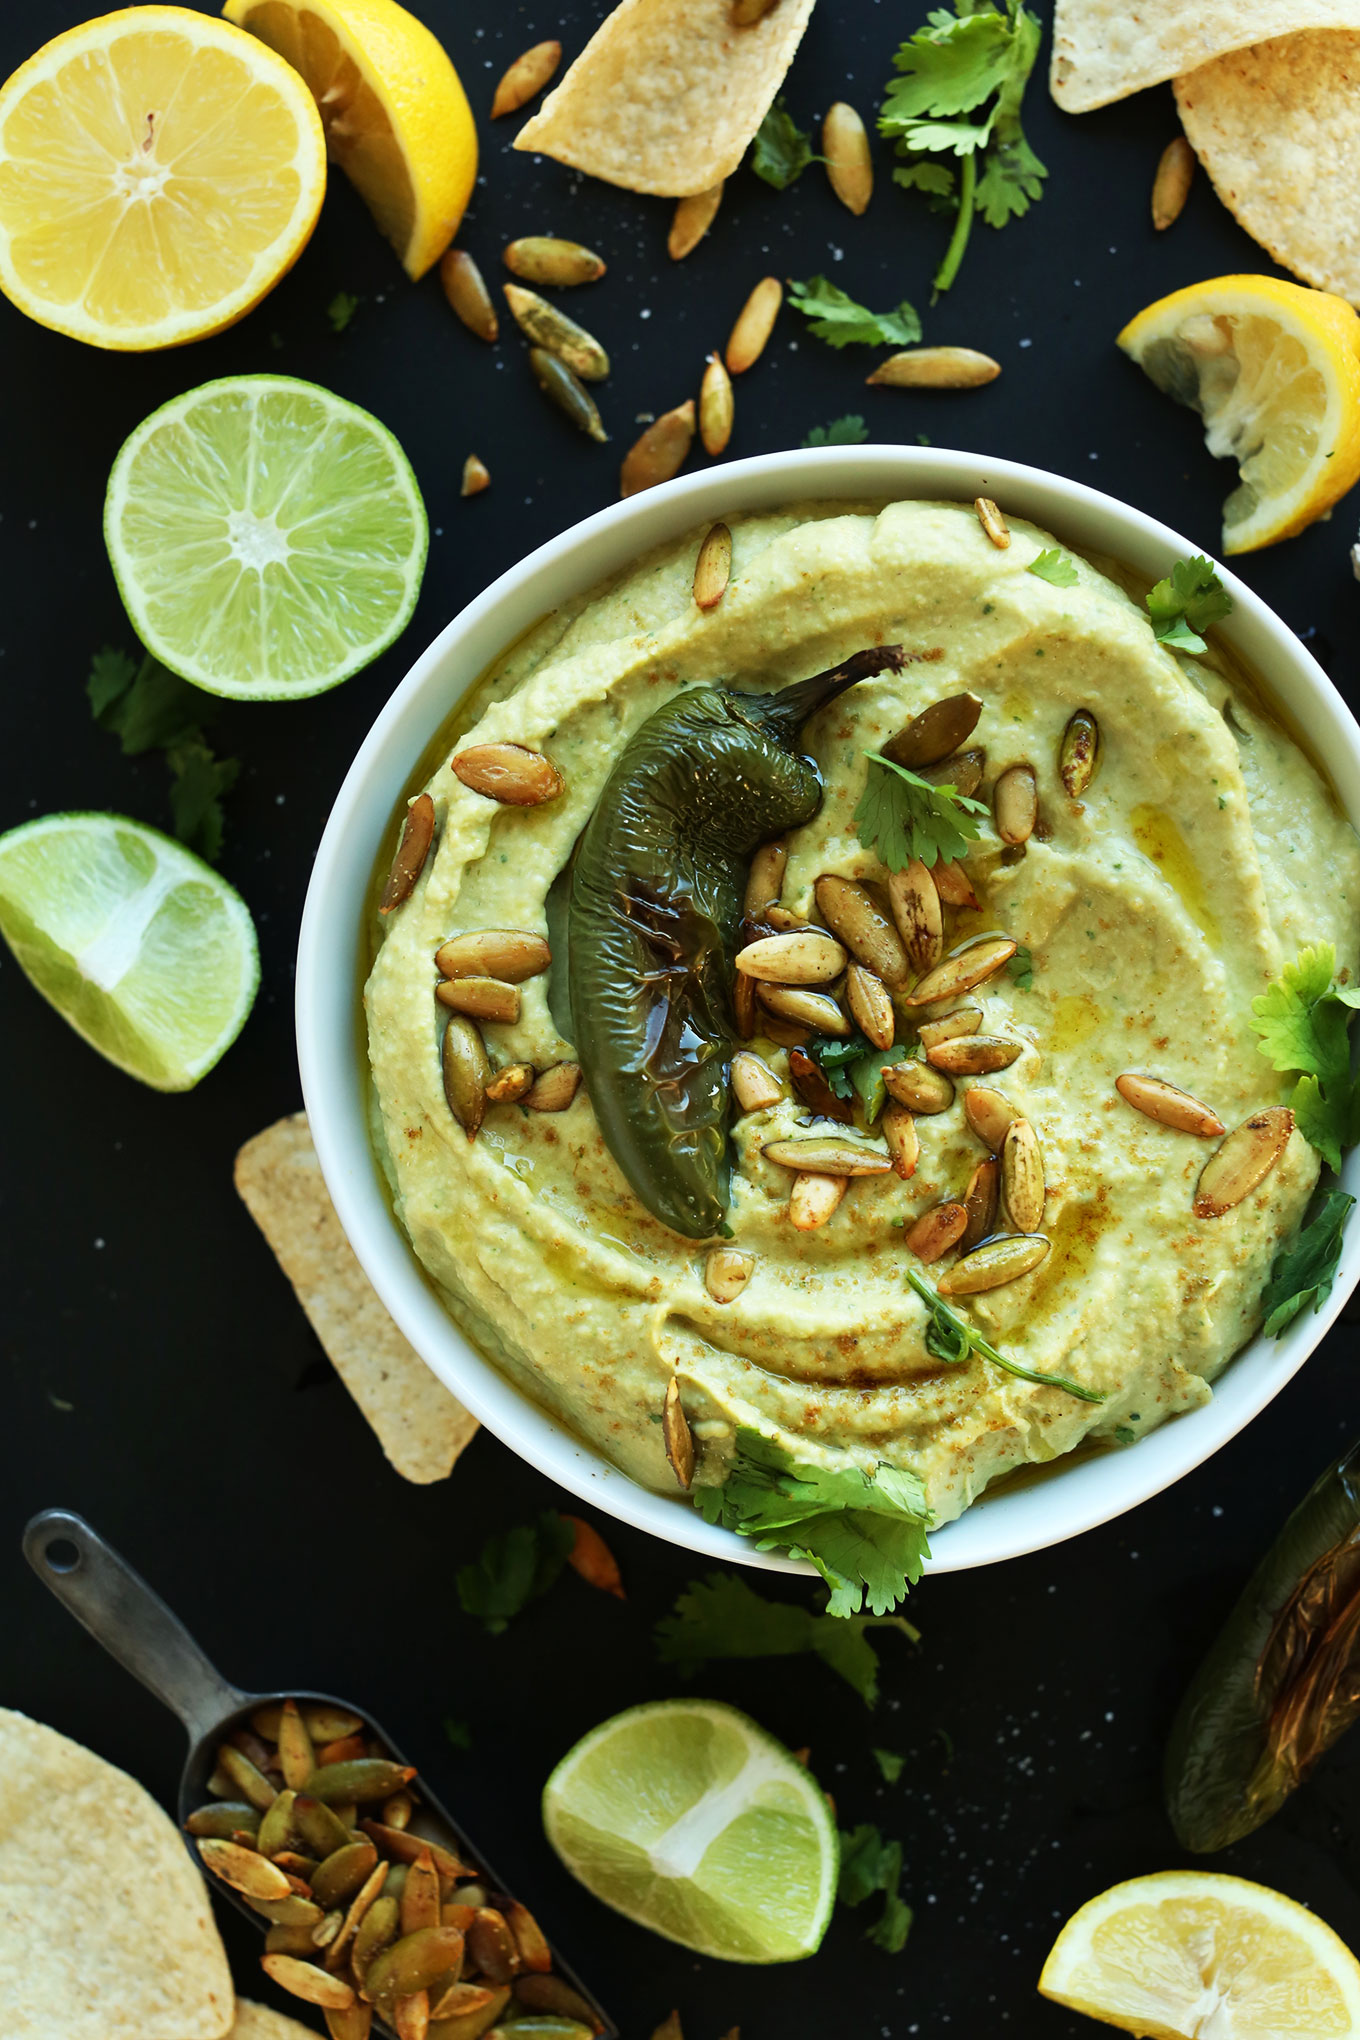 Bowl of homemade Roasted Jalapeno Hummus for a delicious vegan appetizer